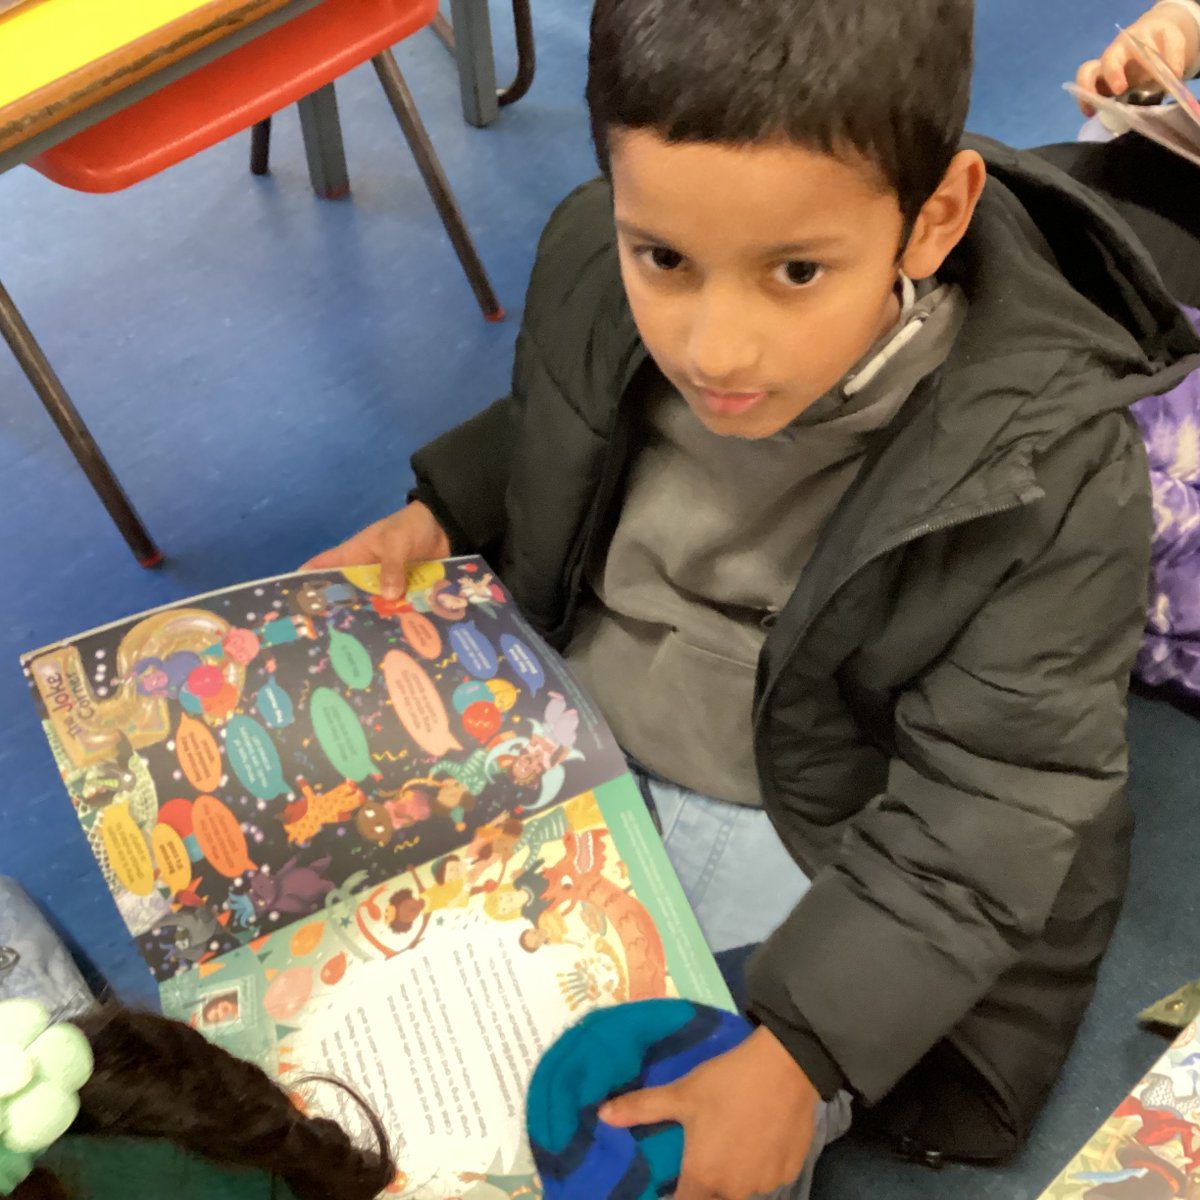 Year 2 enjoyed having a look at their new Story Corner magazine today. As usual, we loved the jokes! Thank you very much @BookmarkCharity, so generous!